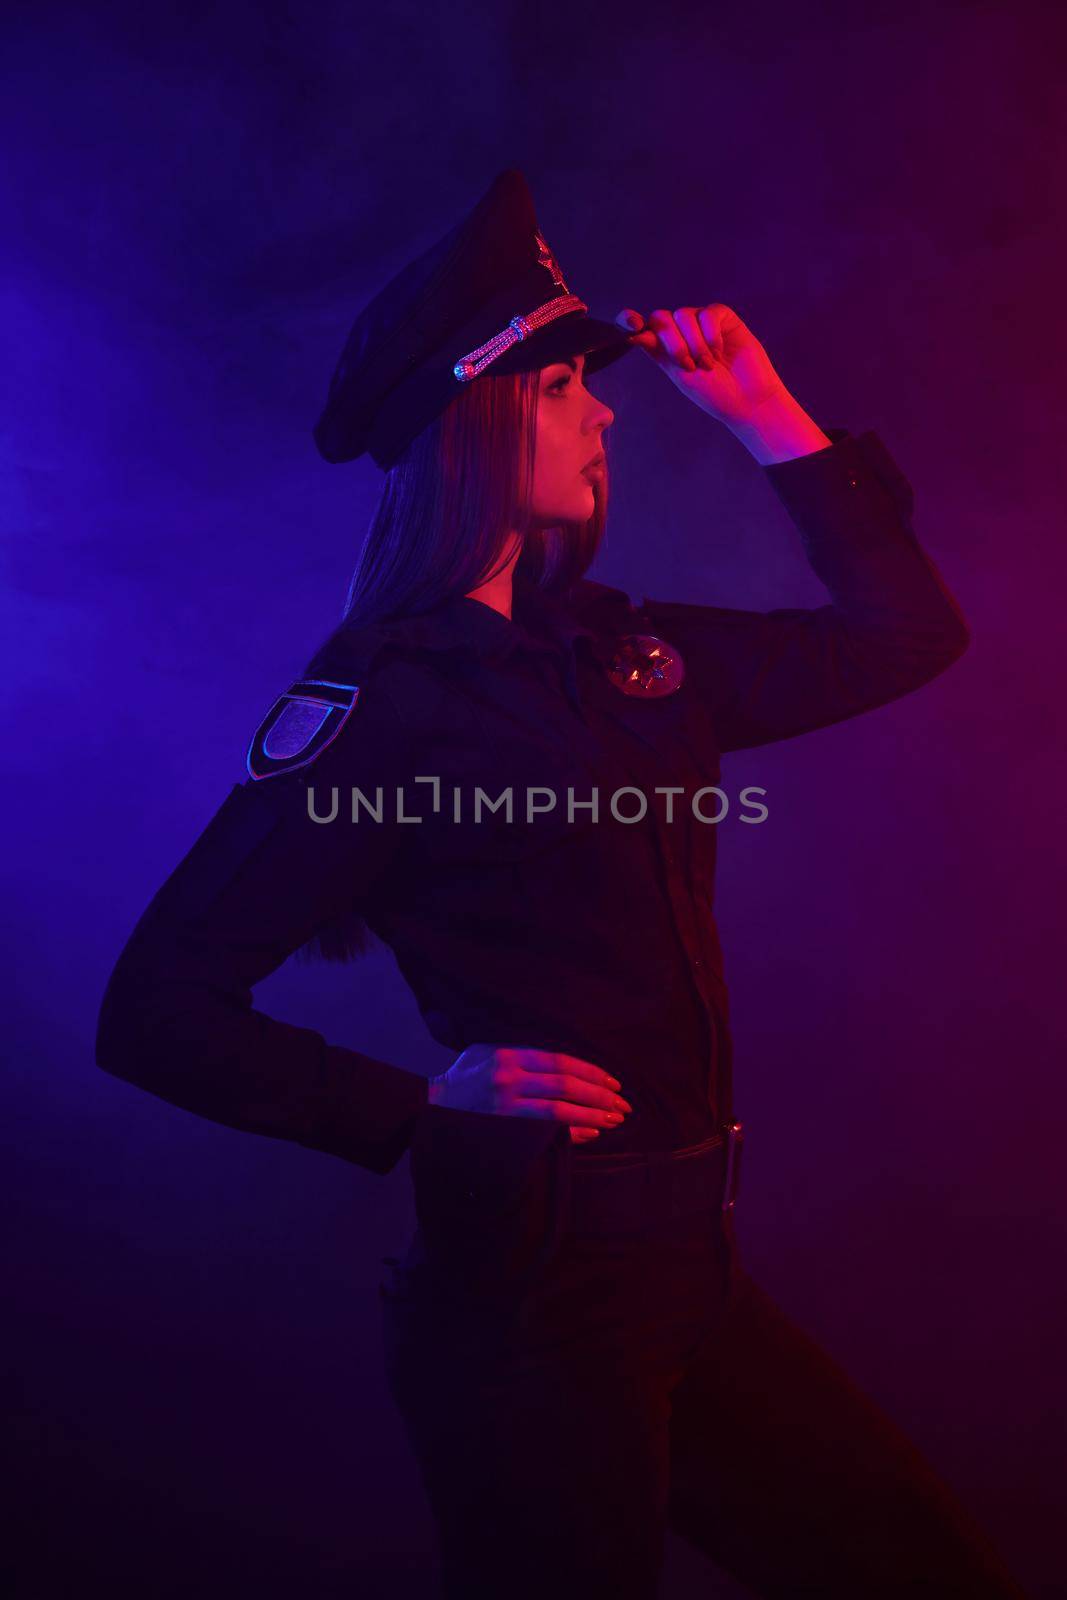 Redheaded female police officer is posing for the camera against a black background with red and blue backlighting. by nazarovsergey